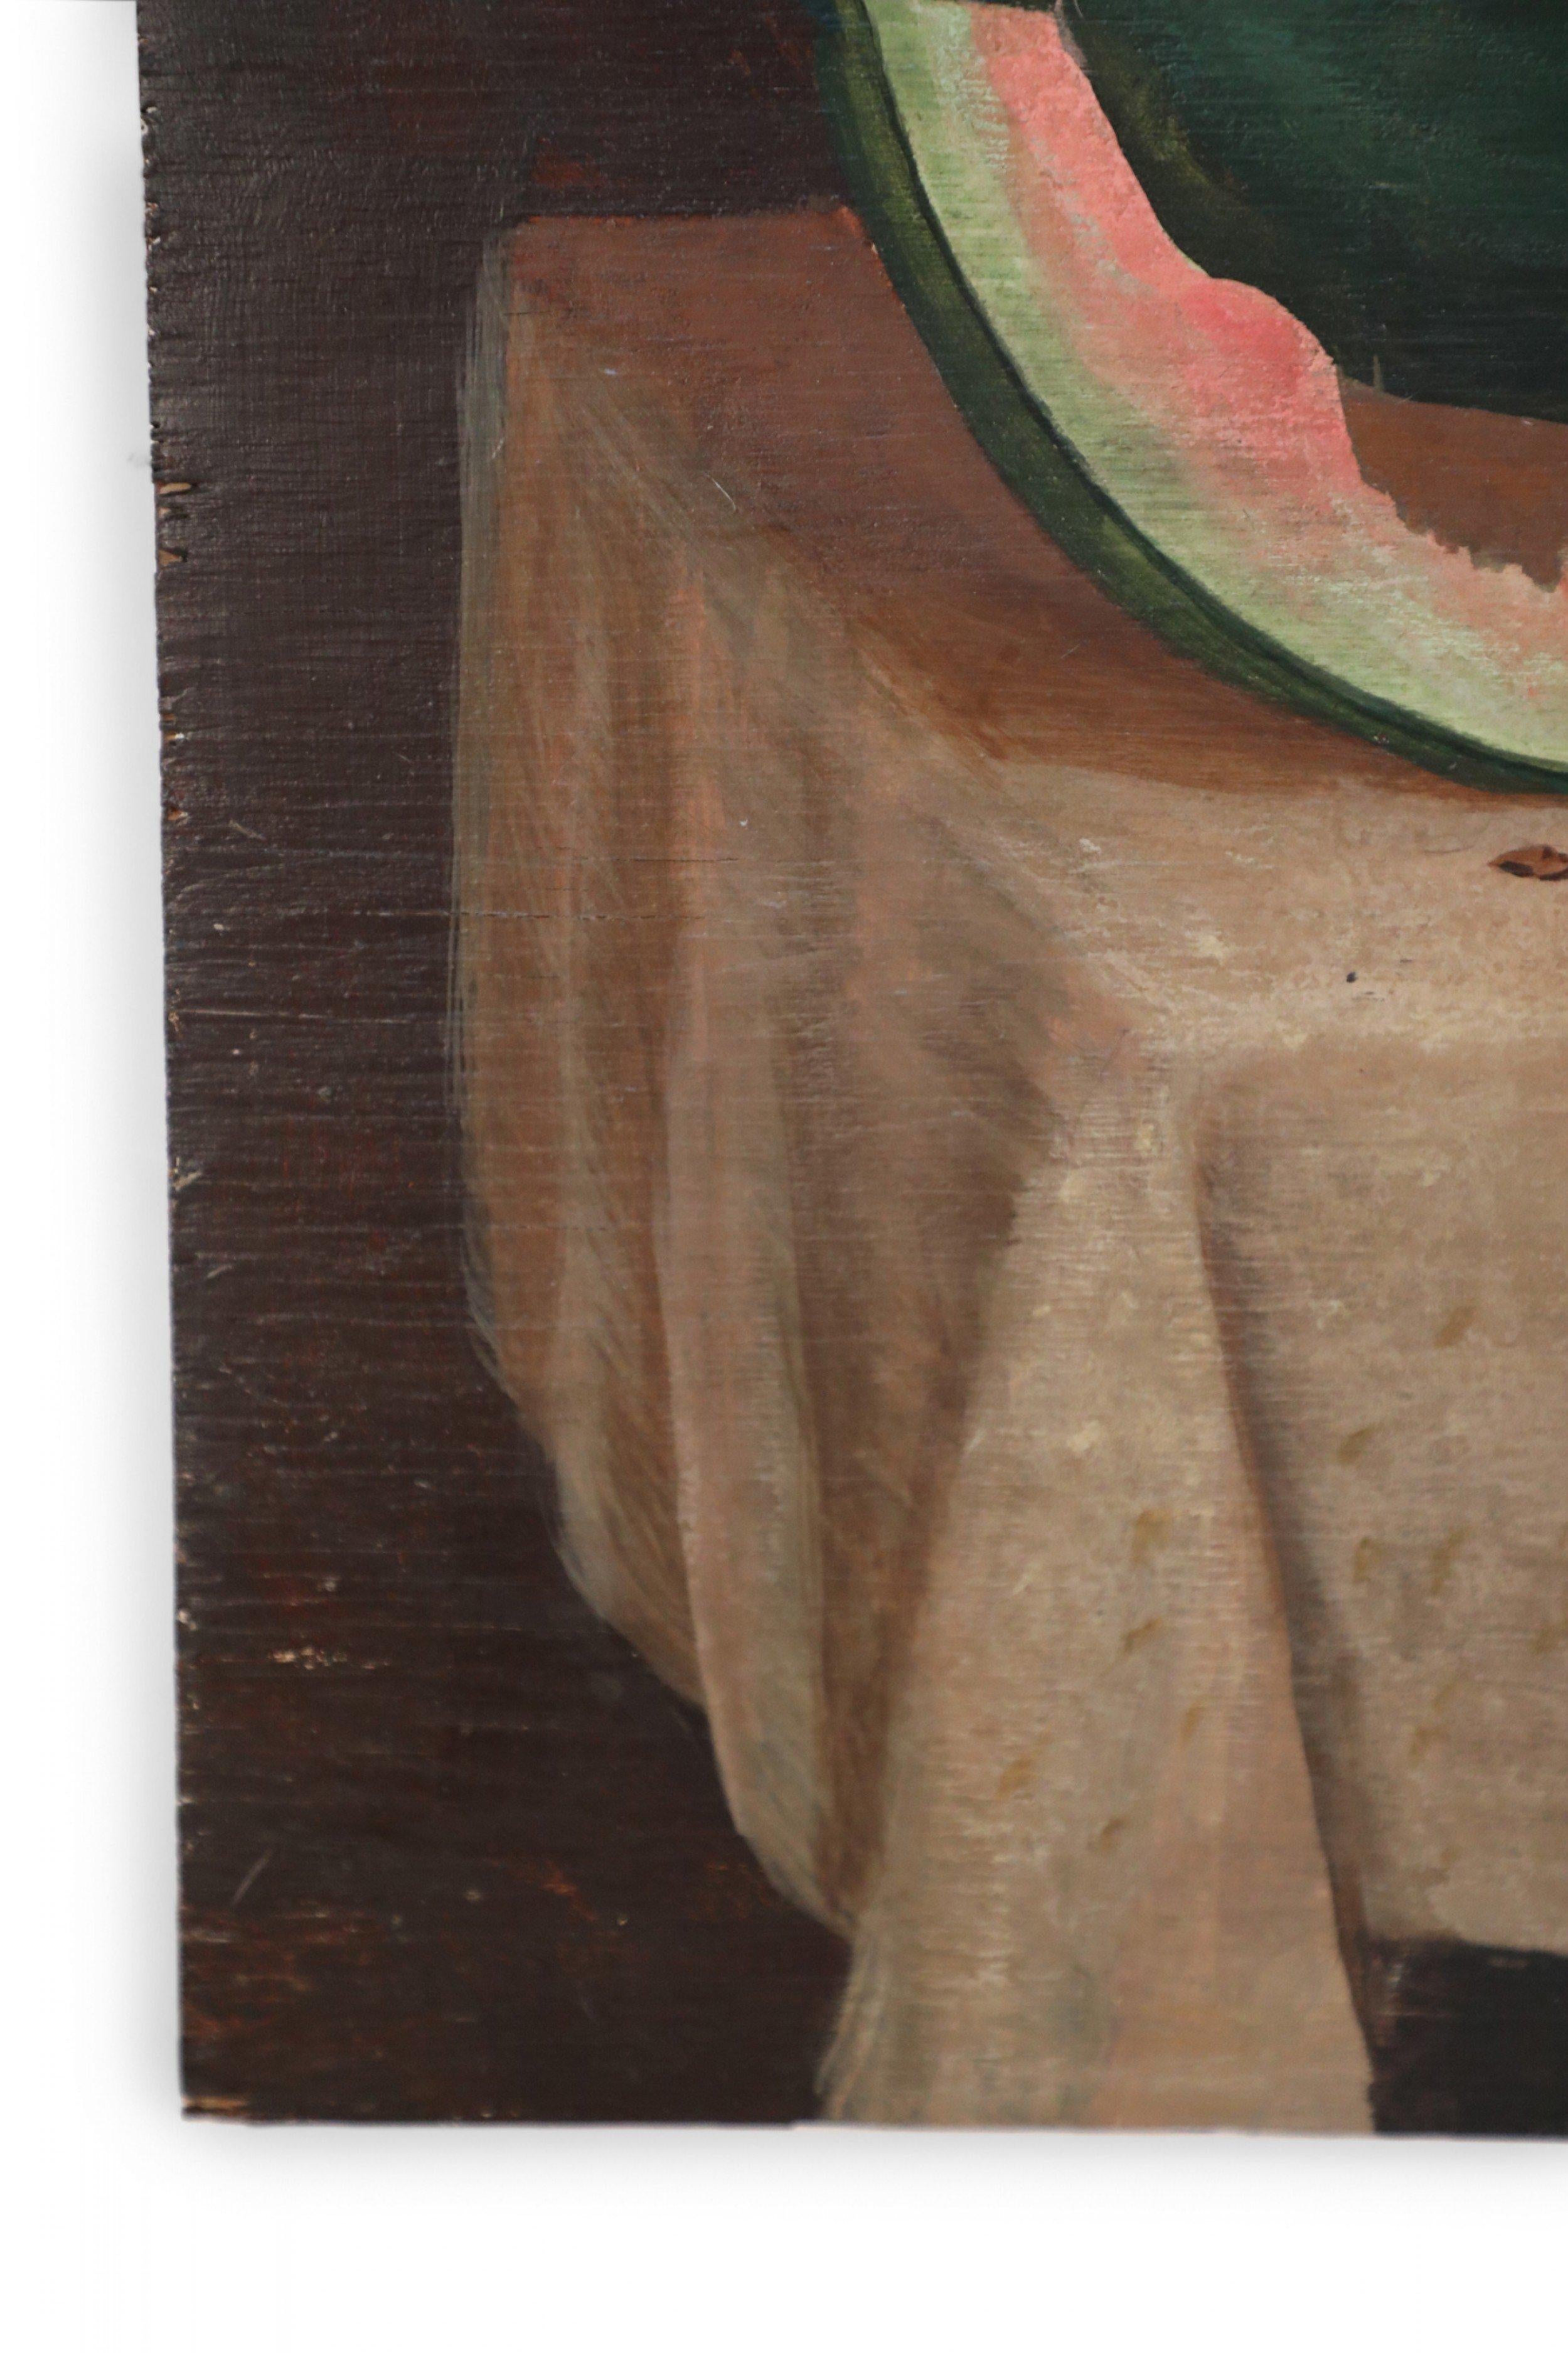 Watermelon and Knife Still Life Painting on Wood In Good Condition For Sale In New York, NY